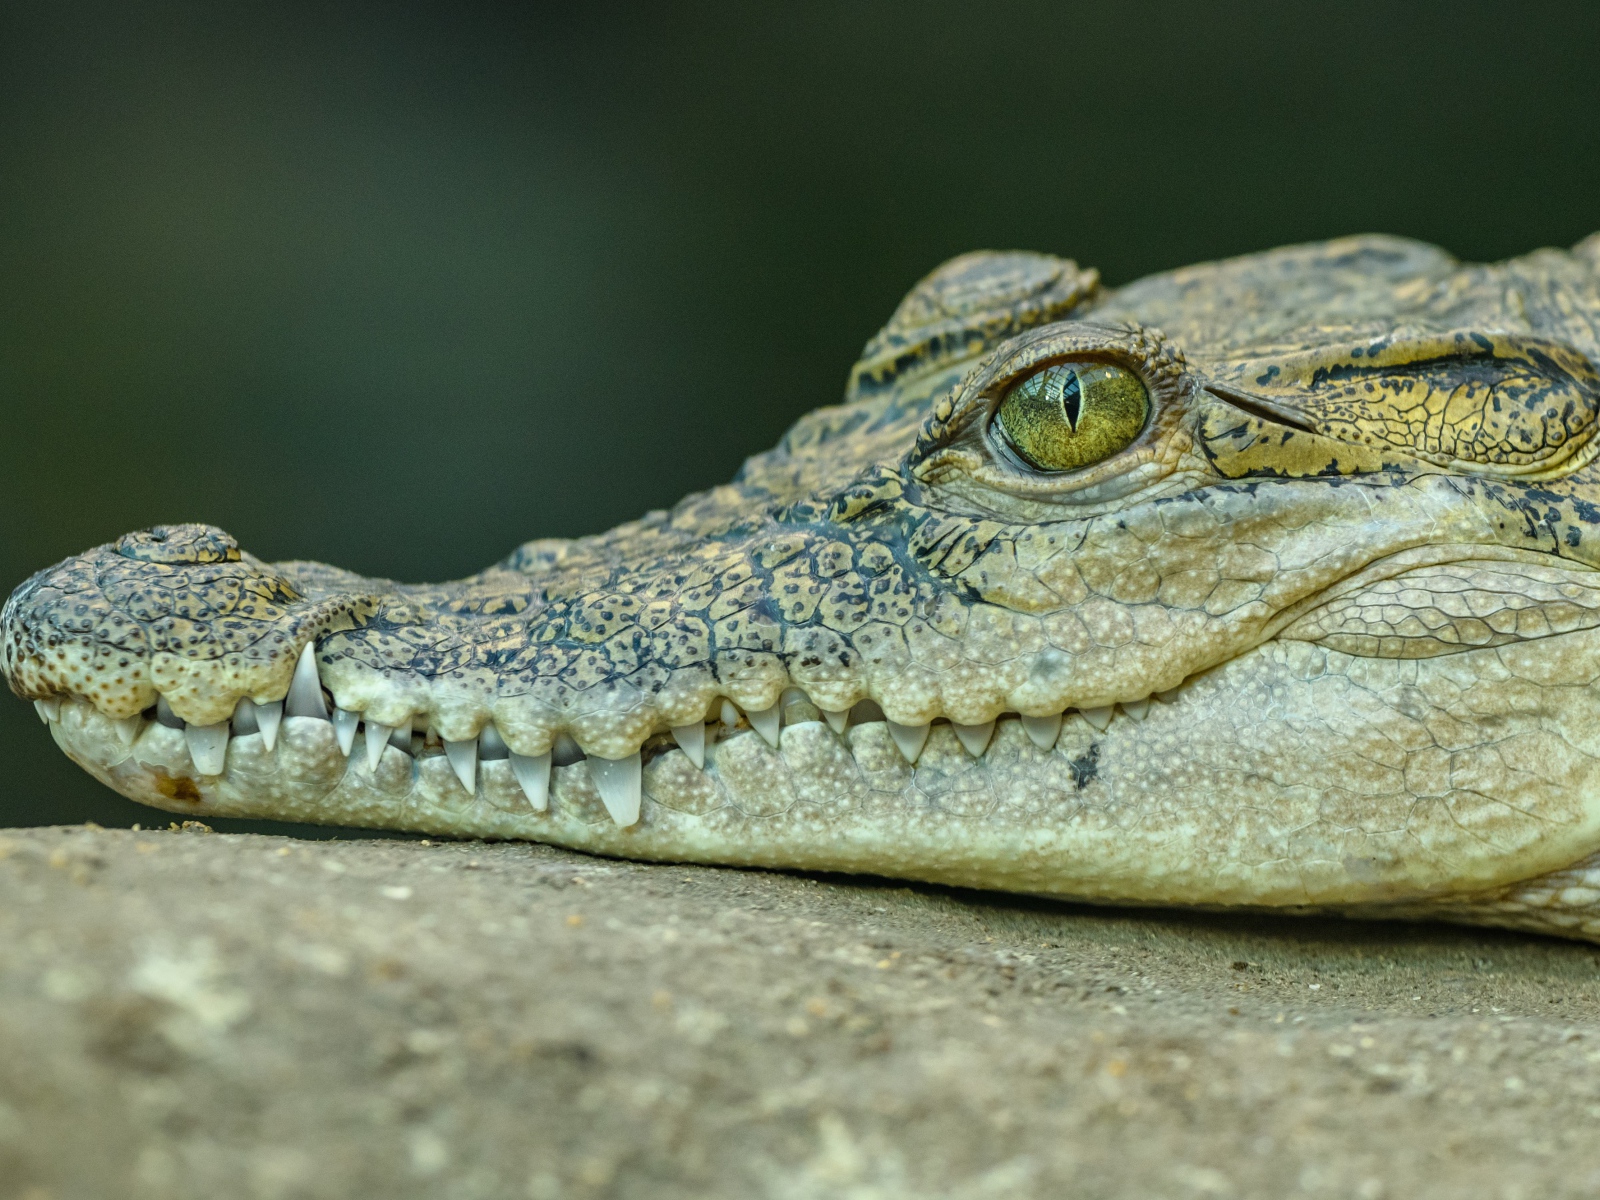 The head of a large alligator with sharp teeth